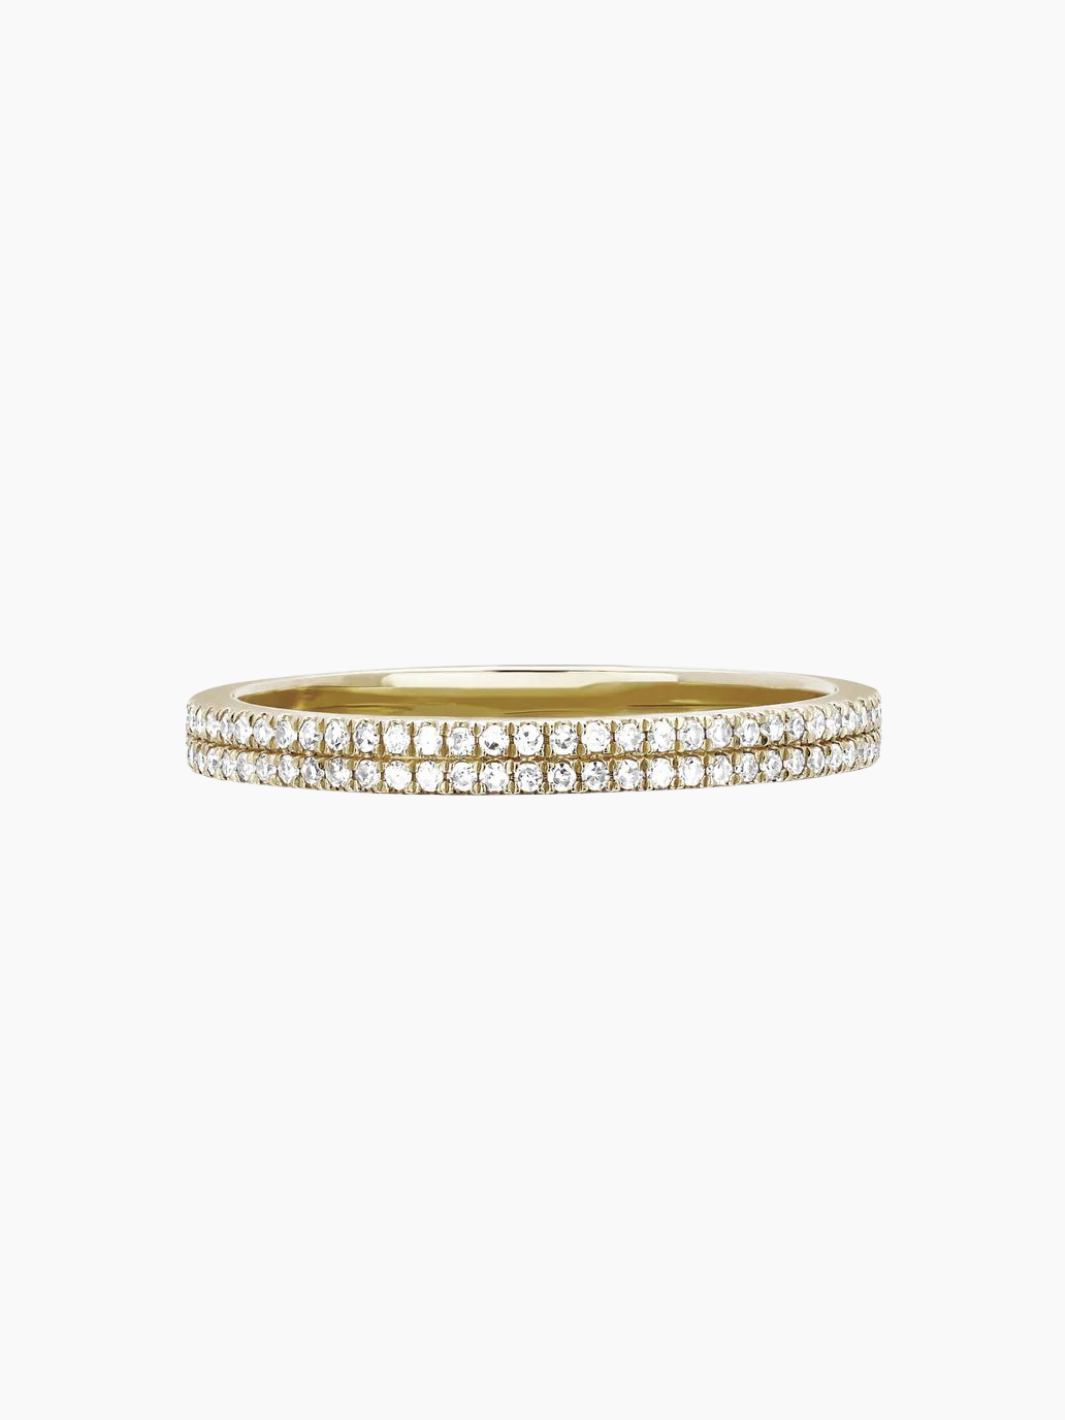 DIAMOND COUBLE ROW ETERNITY RING - Romi Boutique